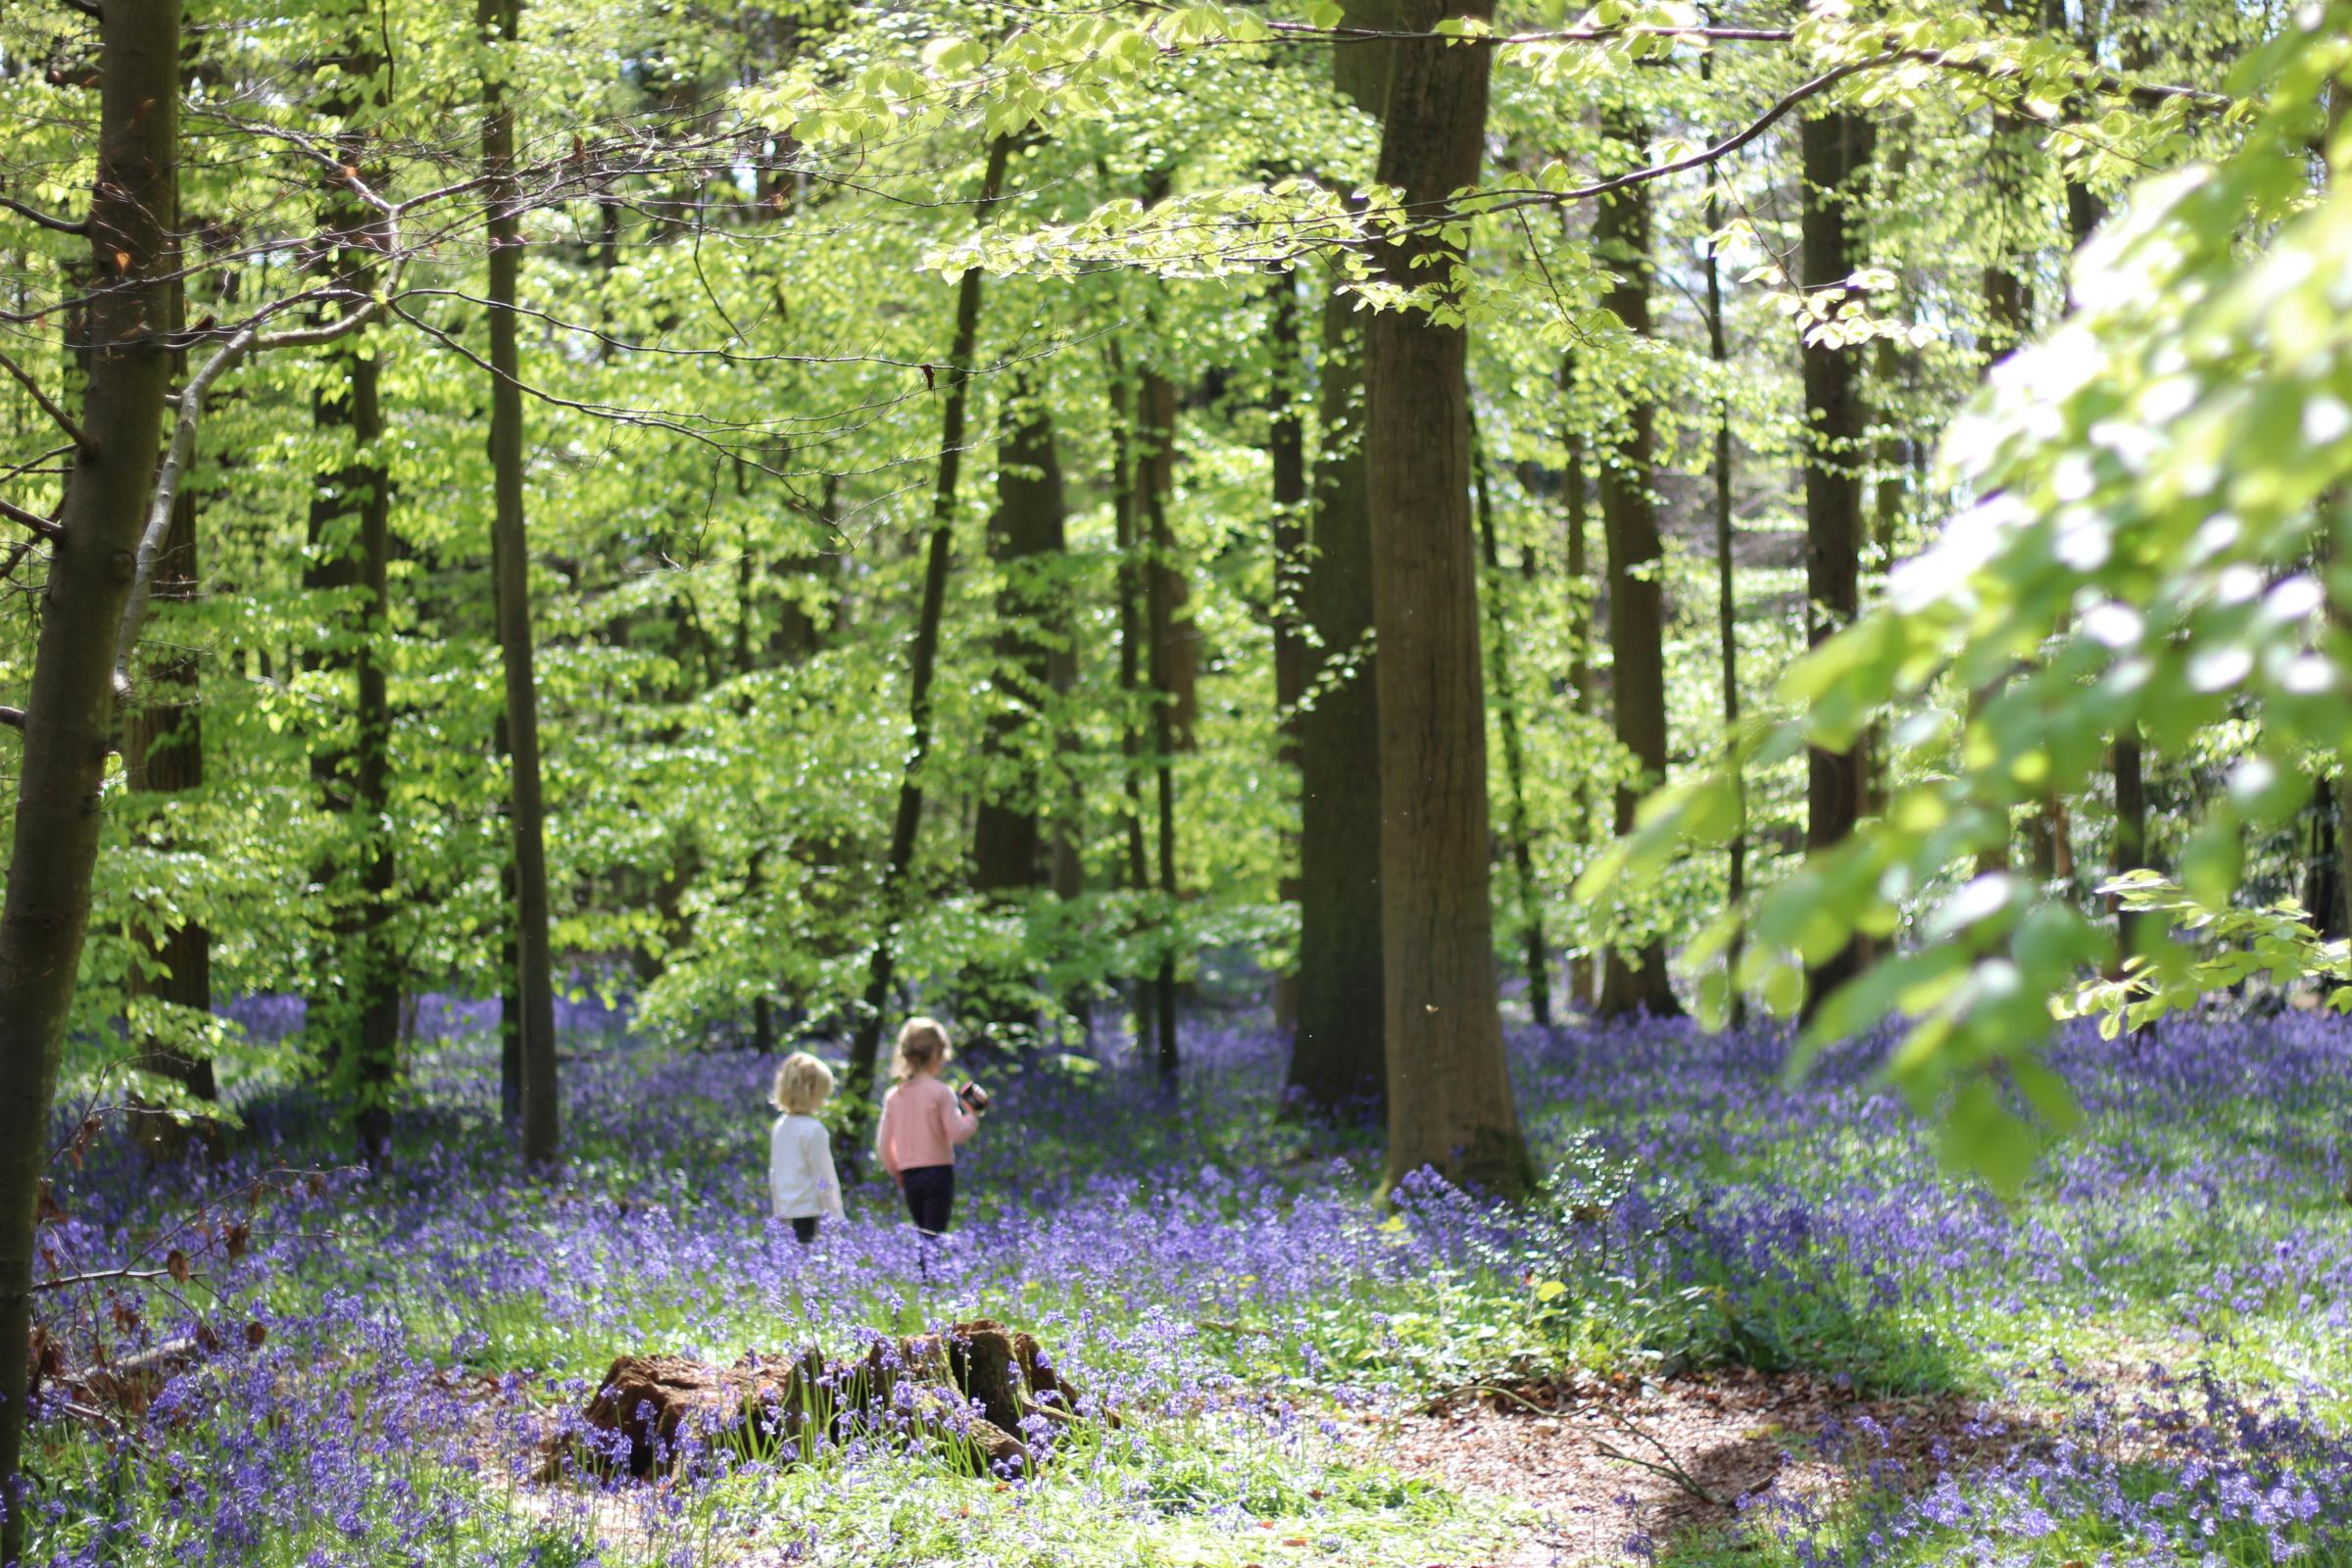 Children enjoying the spring bluebells in the Chilterns Area of Outstanding Natural Beauty.